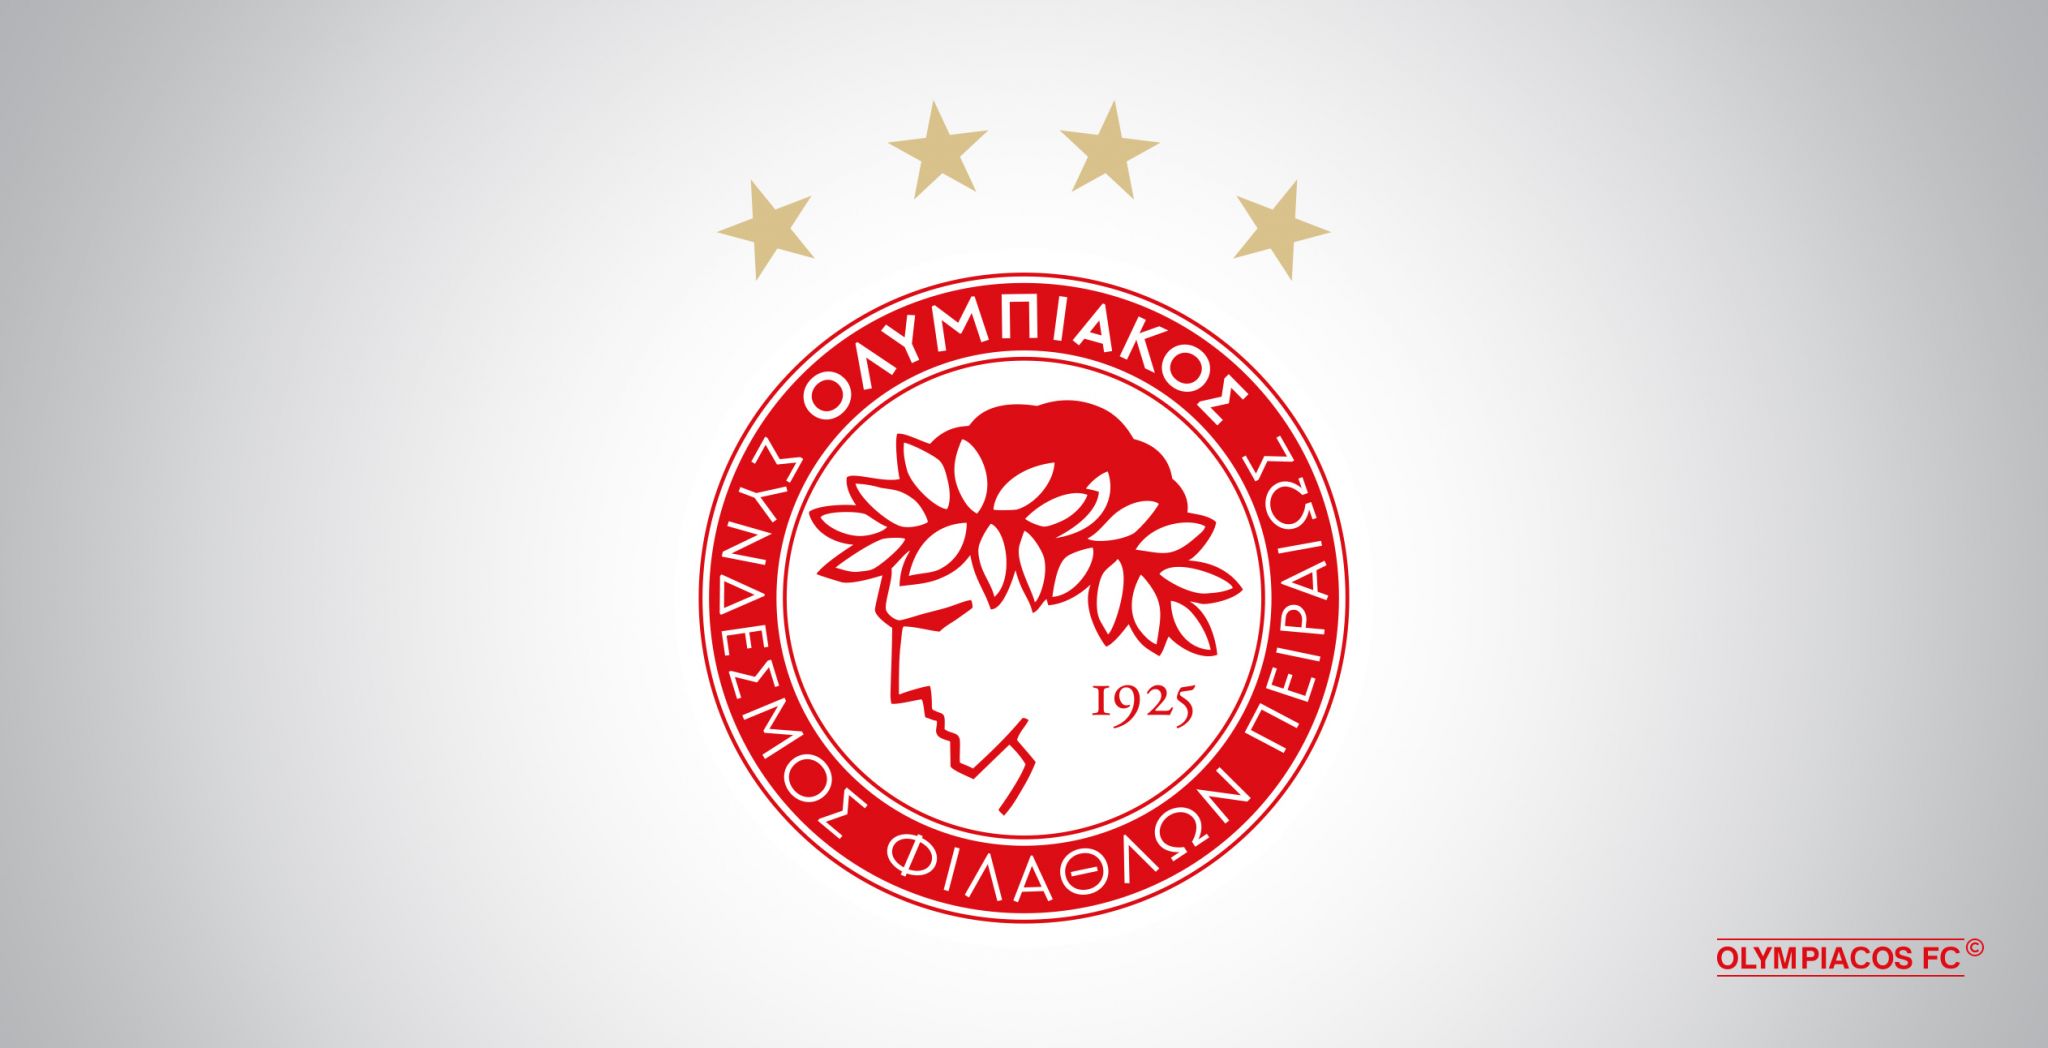 Press Release by Olympiacos FC